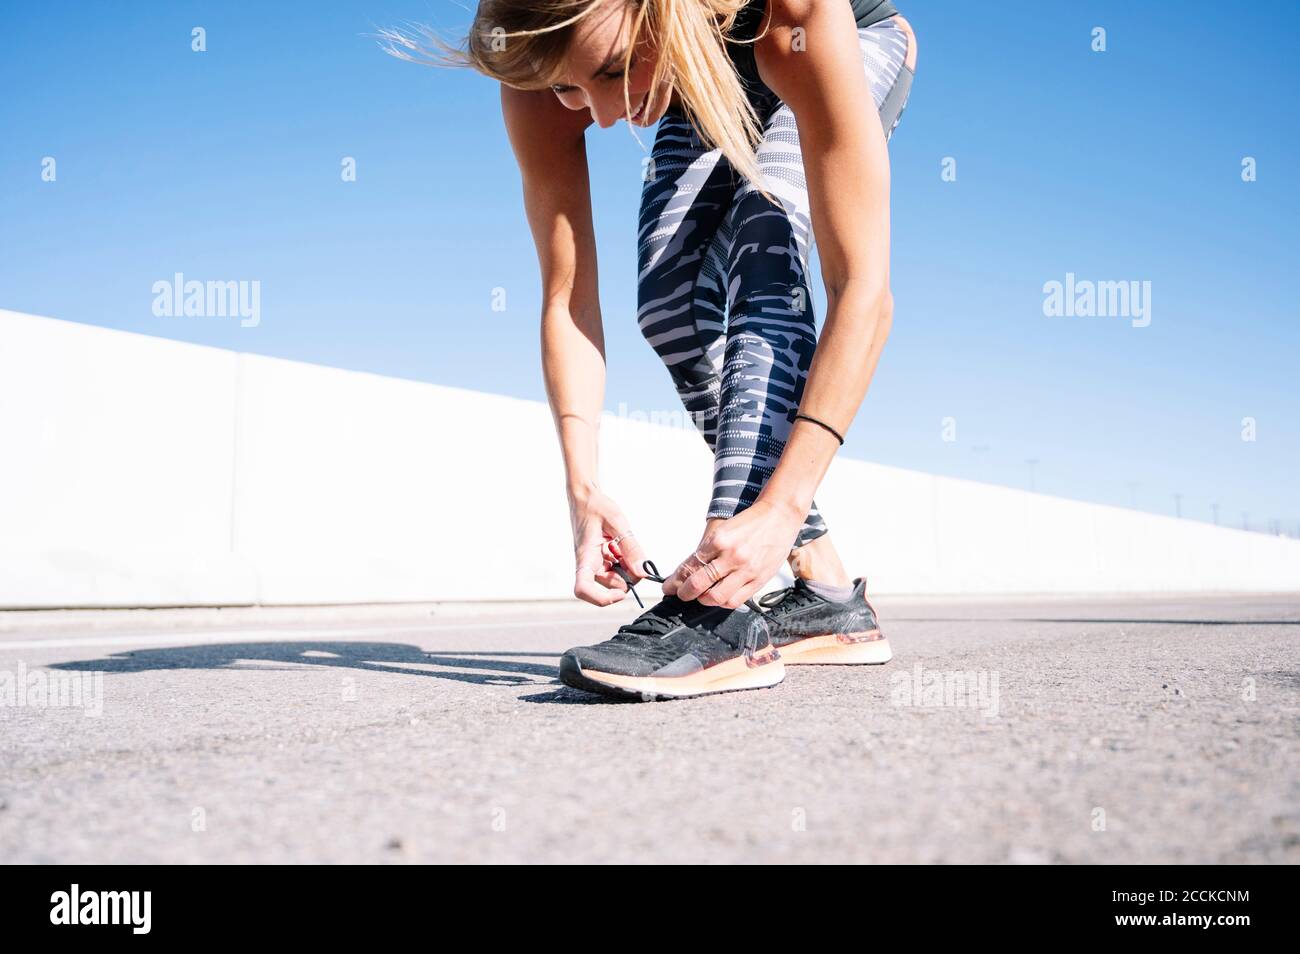 Mid adult woman tying shoelace on road against clear blue sky in city Stock Photo